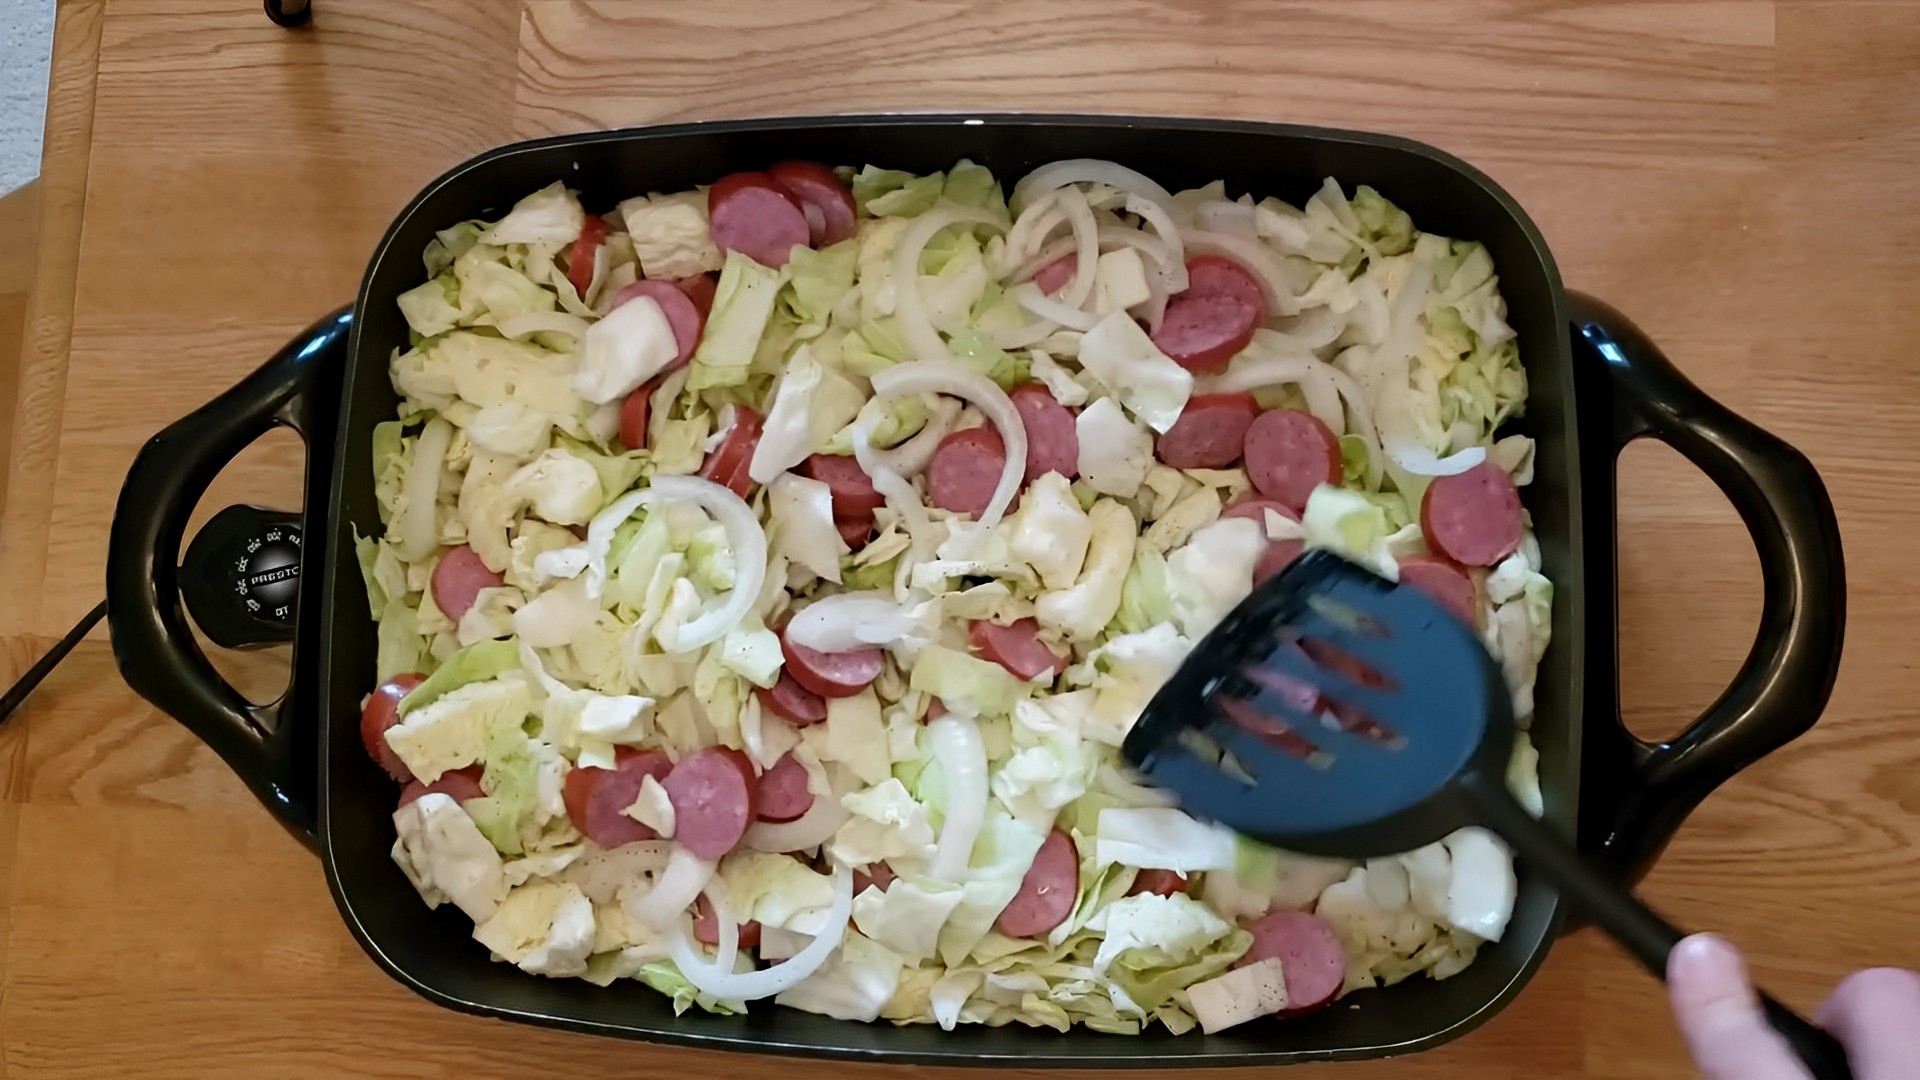 How To Cook Cabbage In Electric Skillet